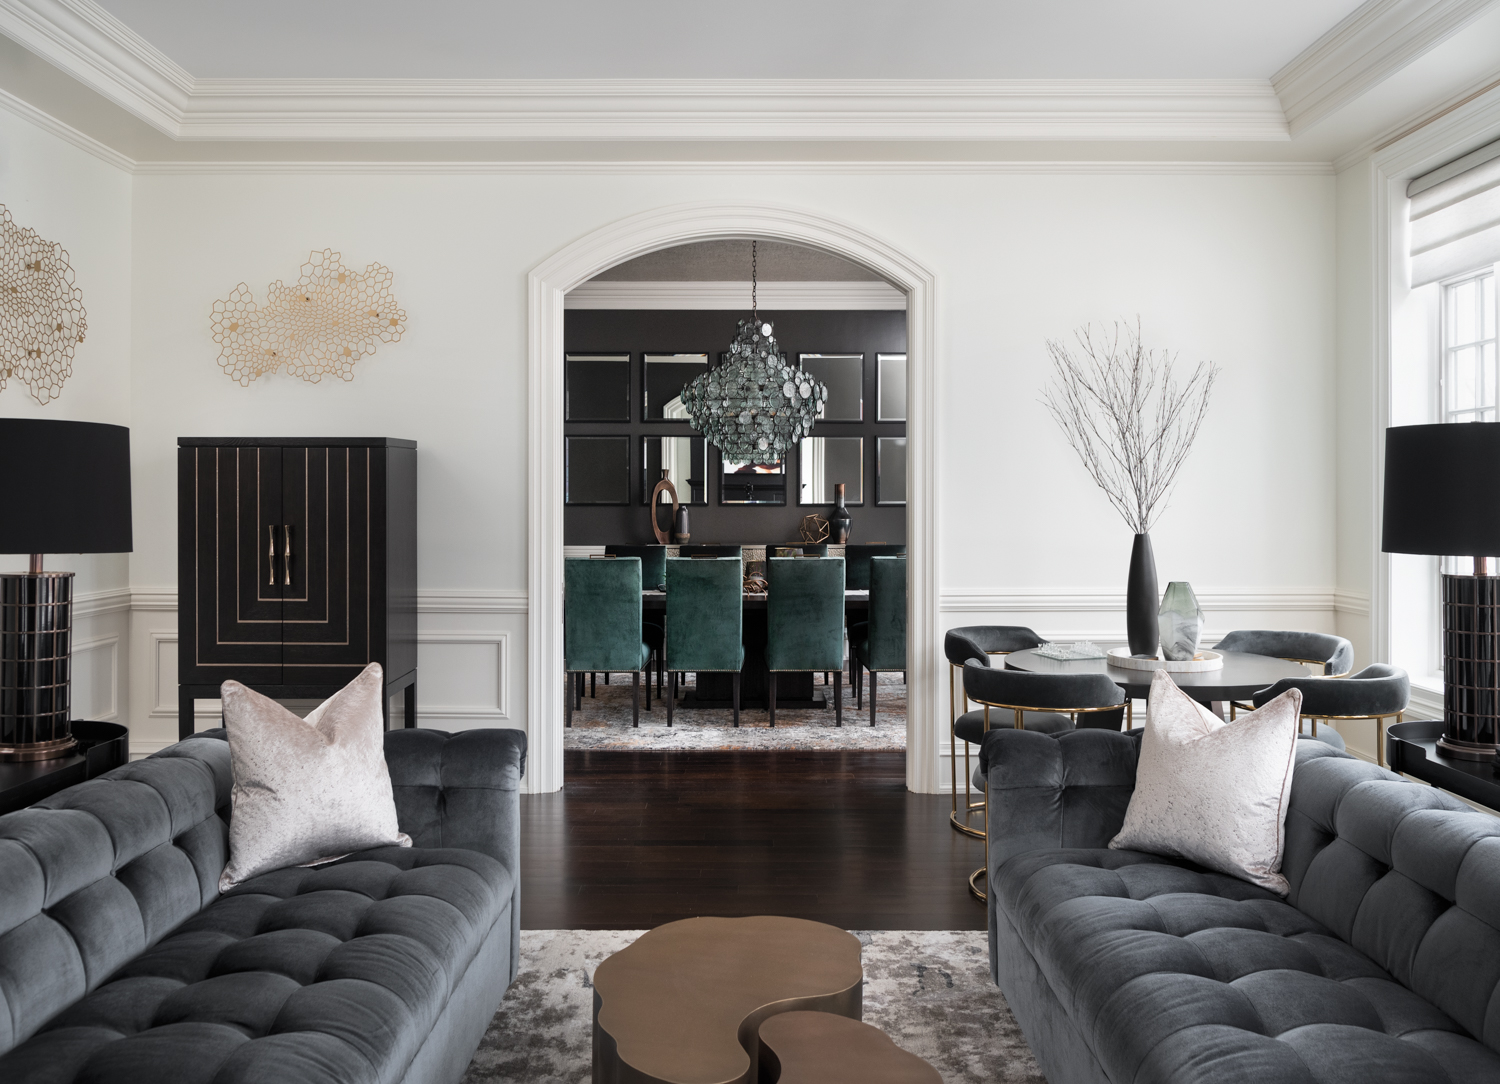 The view into a dark dining room from a living room with two gray velvet couches.